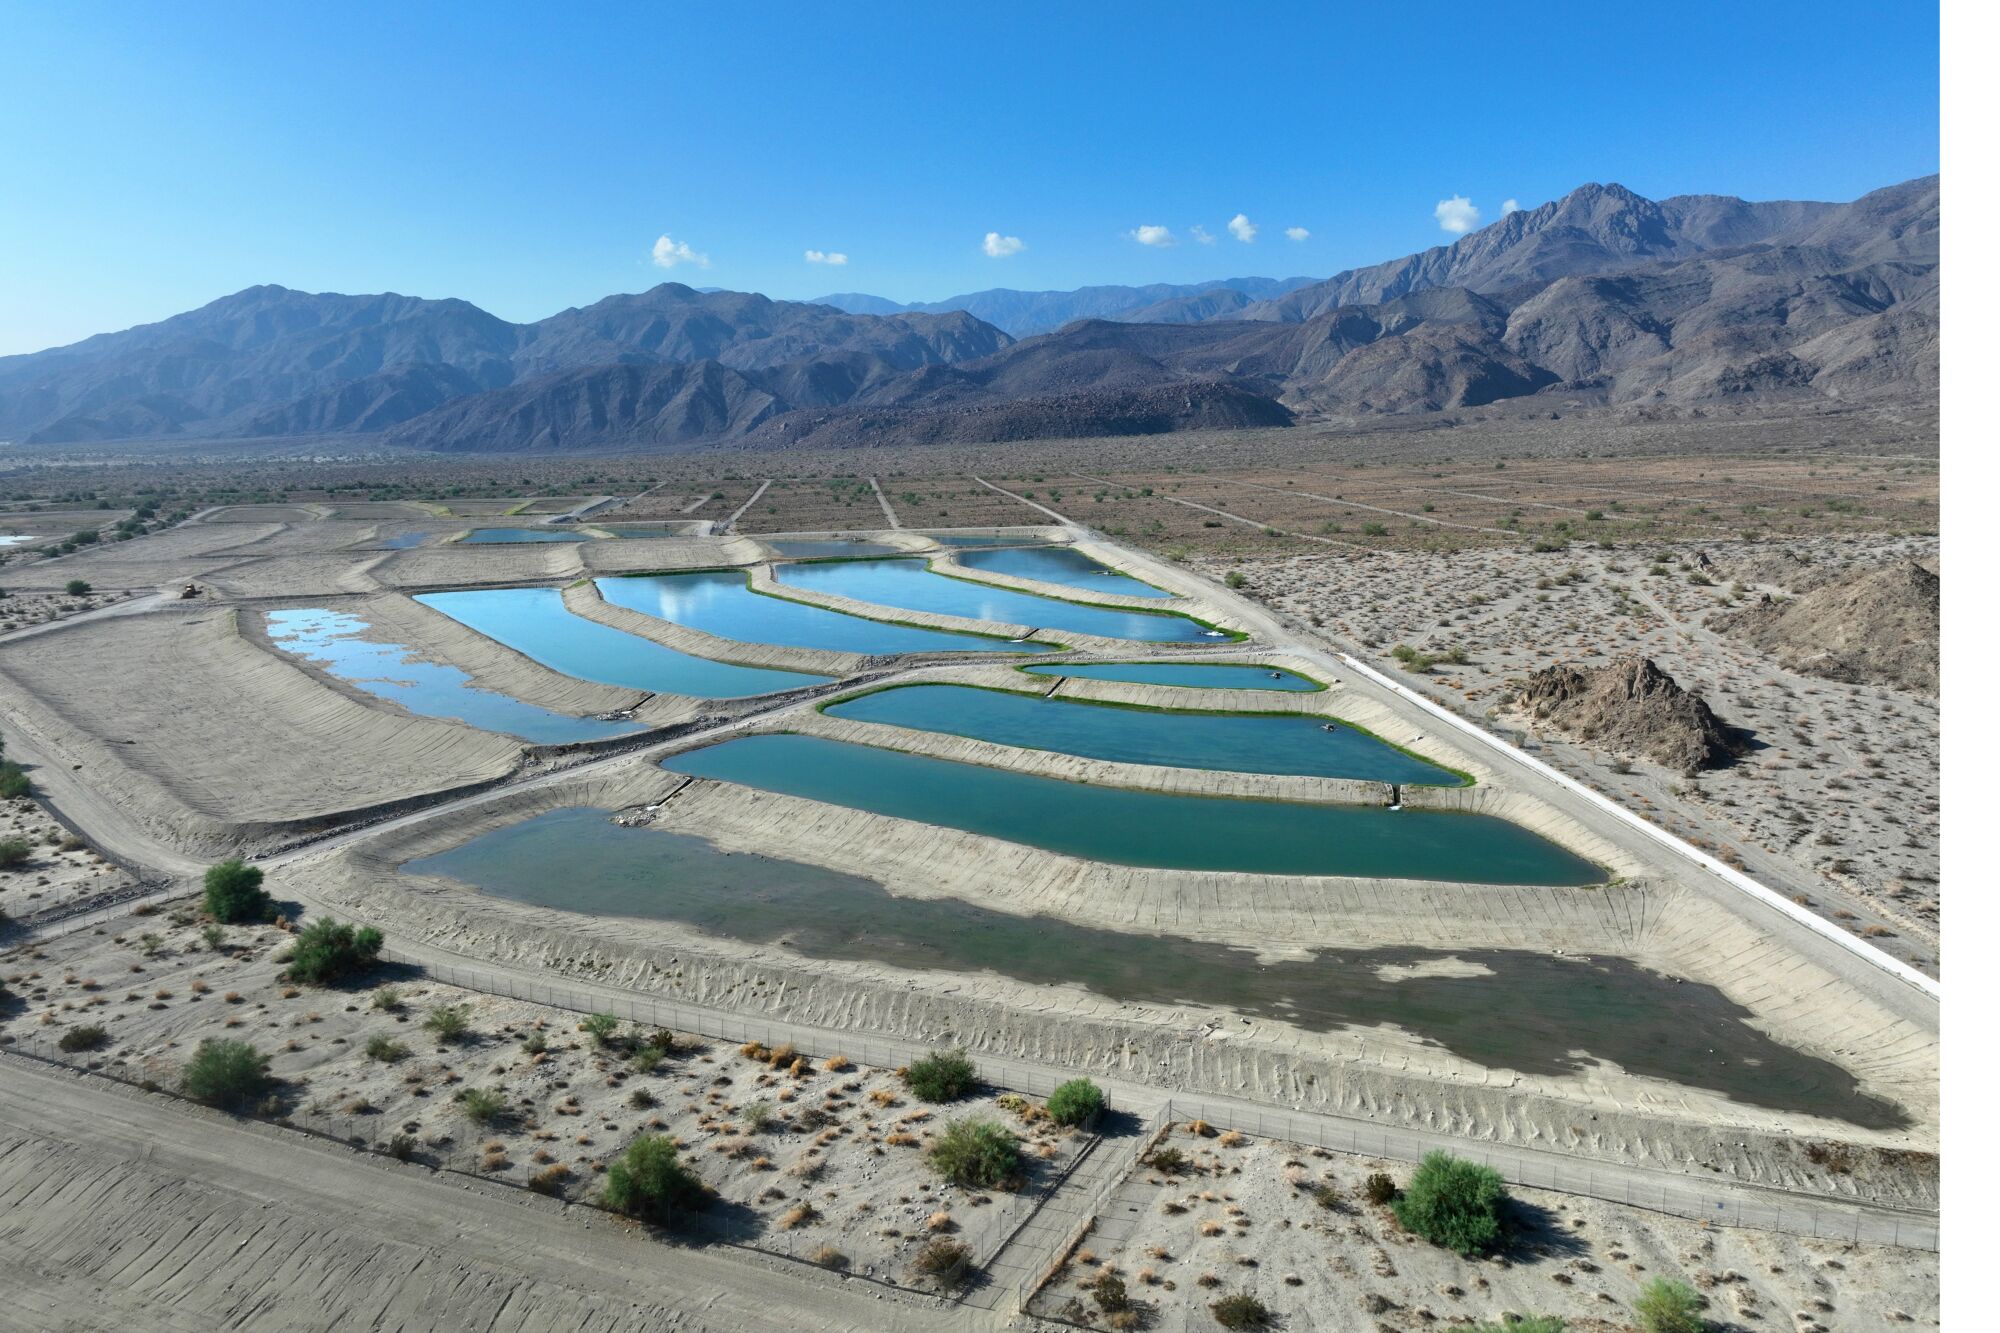 Ponds of water at a facility in the middle of a desert